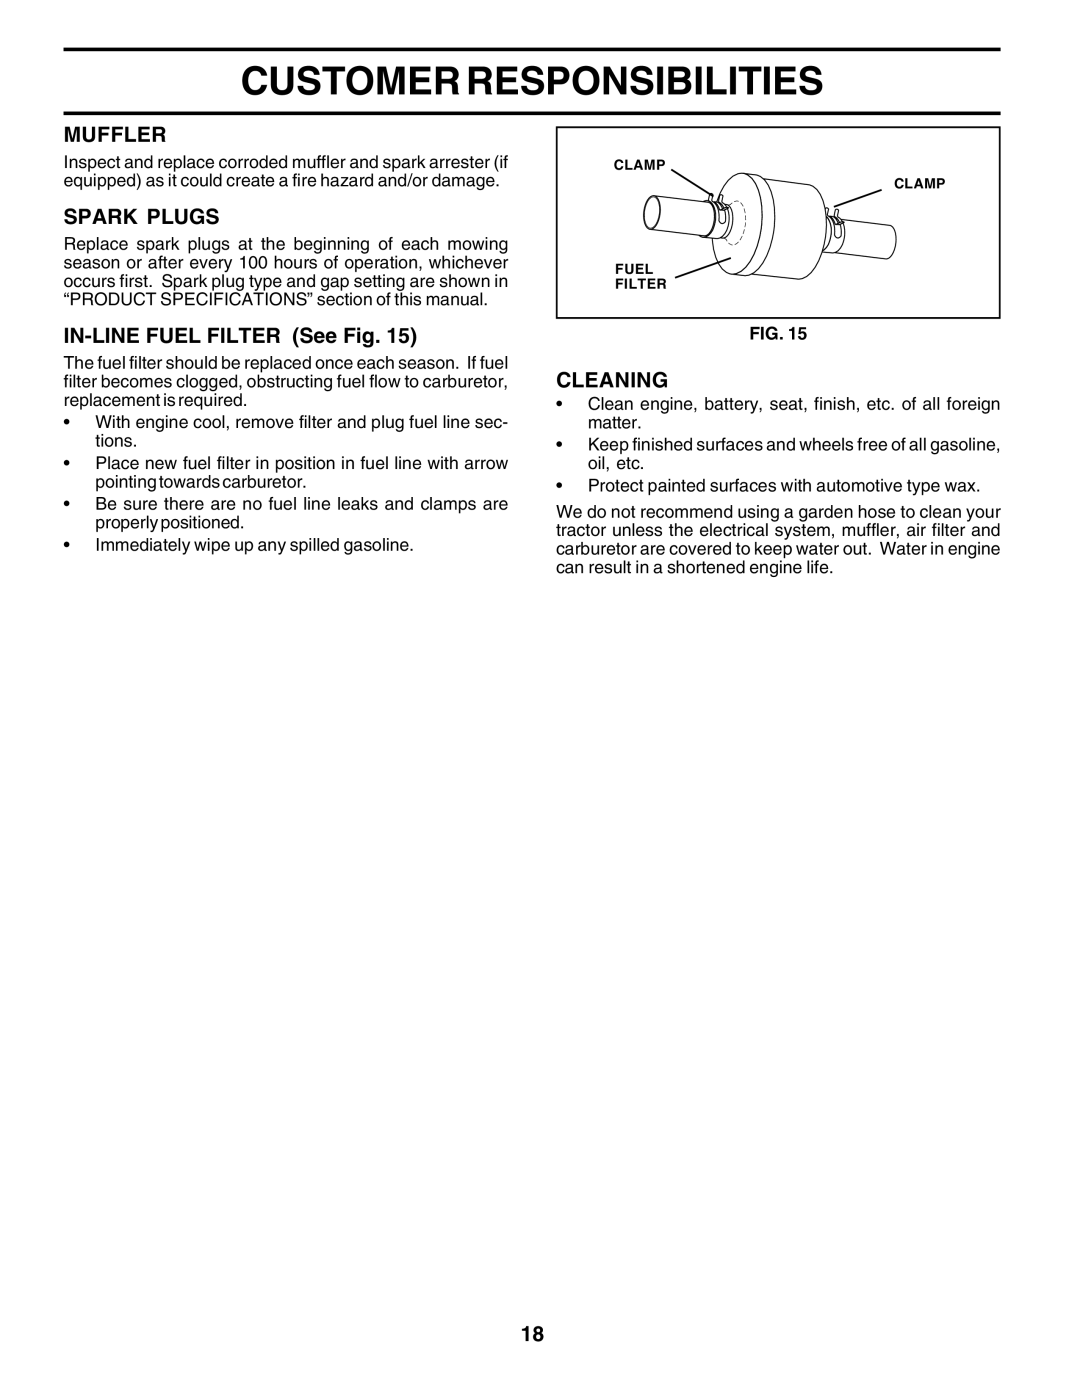 Poulan 182080 manual Muffler, Spark Plugs, IN-LINEFUEL FILTER See Fig, Cleaning, Customer Responsibilities 